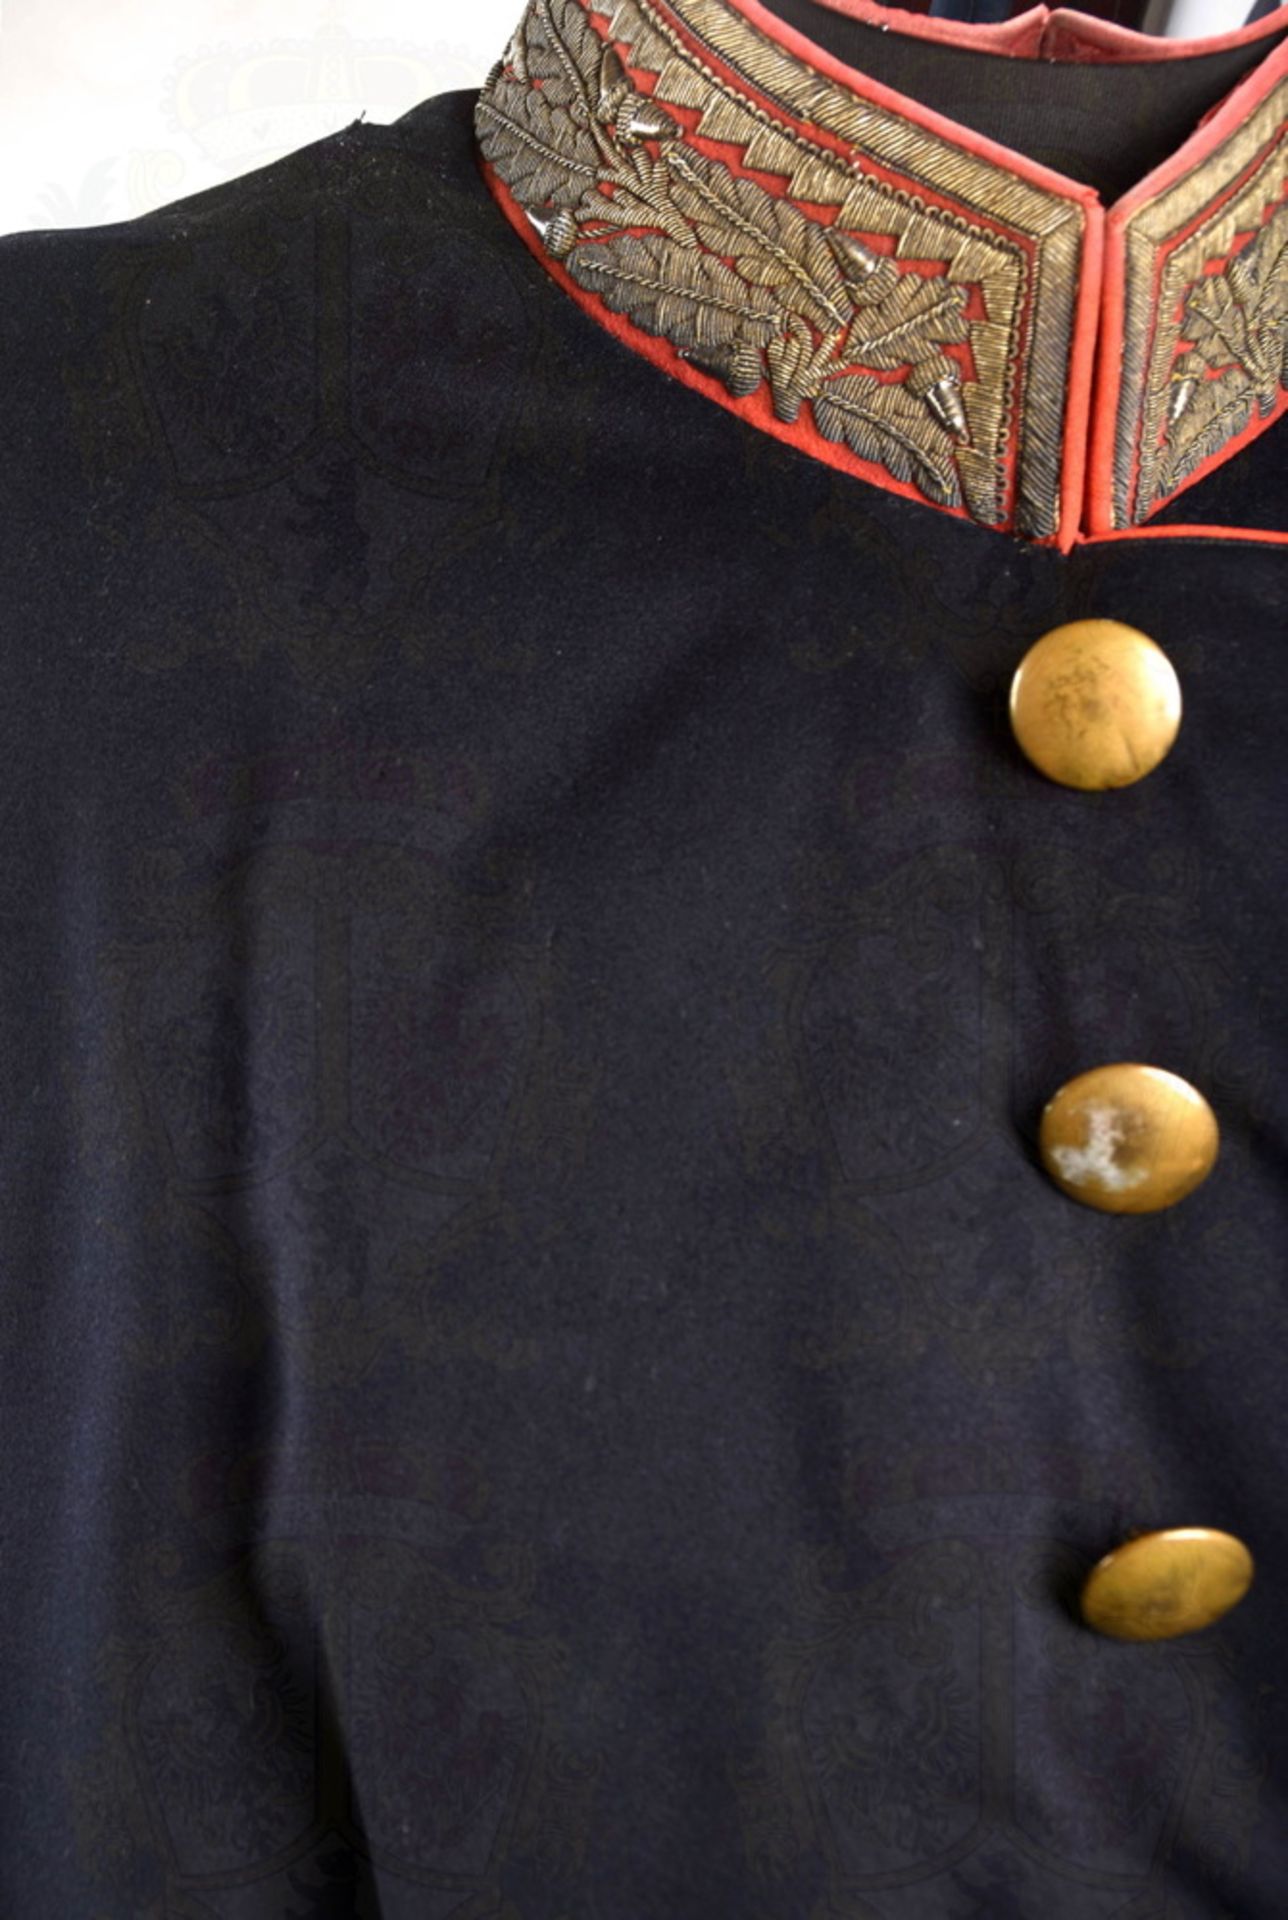 Parade tunic for Prussian generals - Image 4 of 7